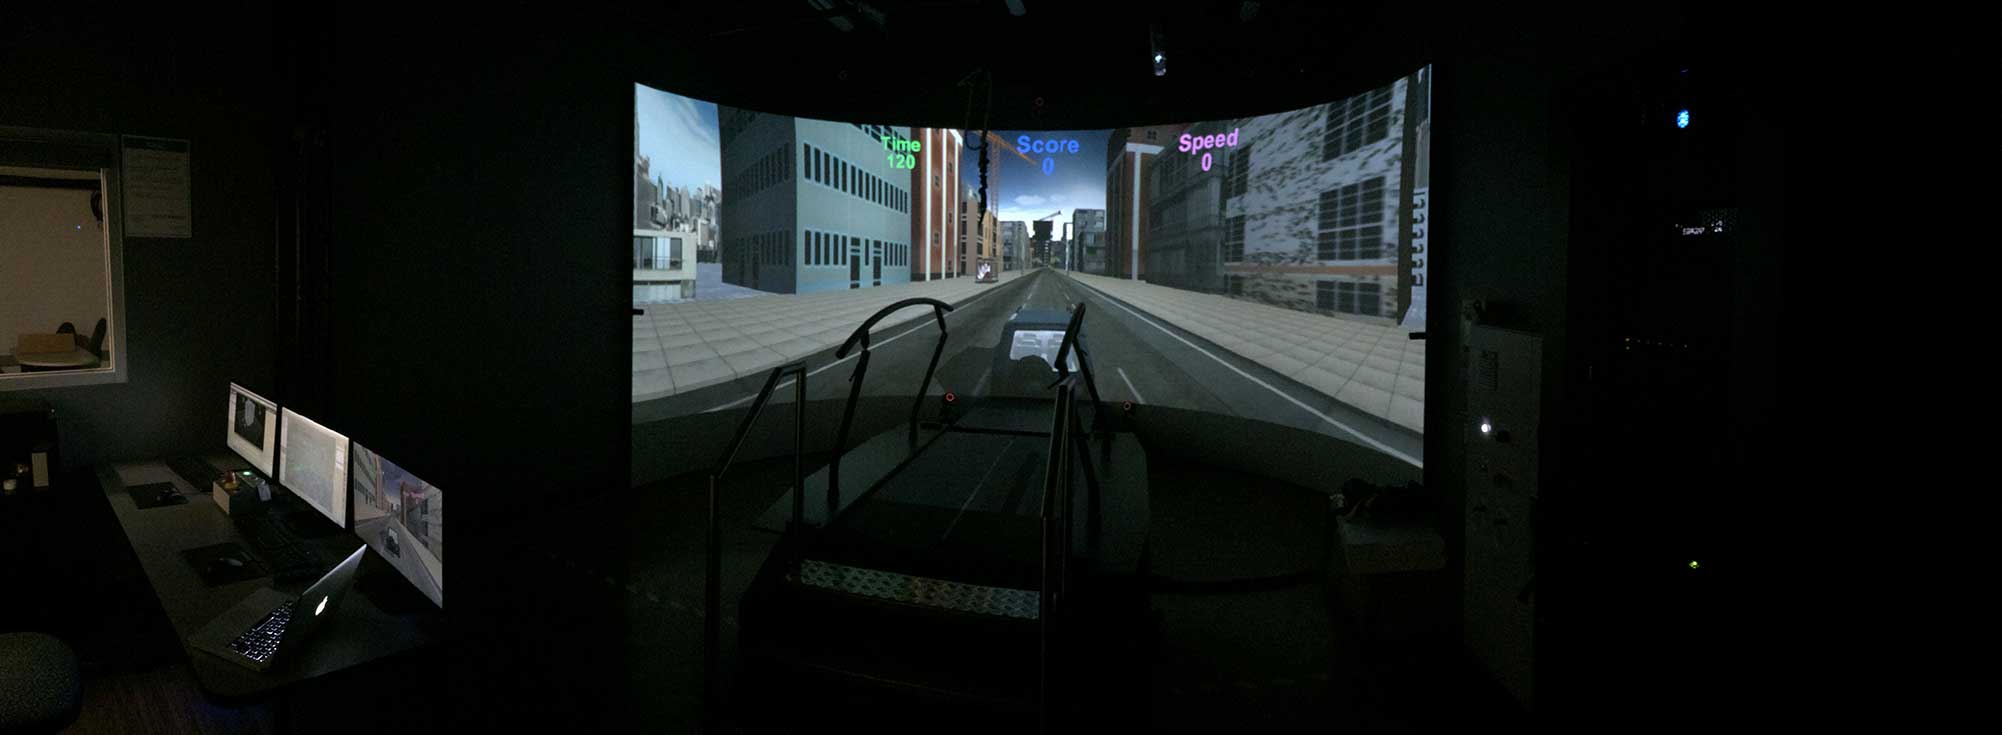 A virtual reality city displays on the enormous curved screen that surrounds the rehab treadmill